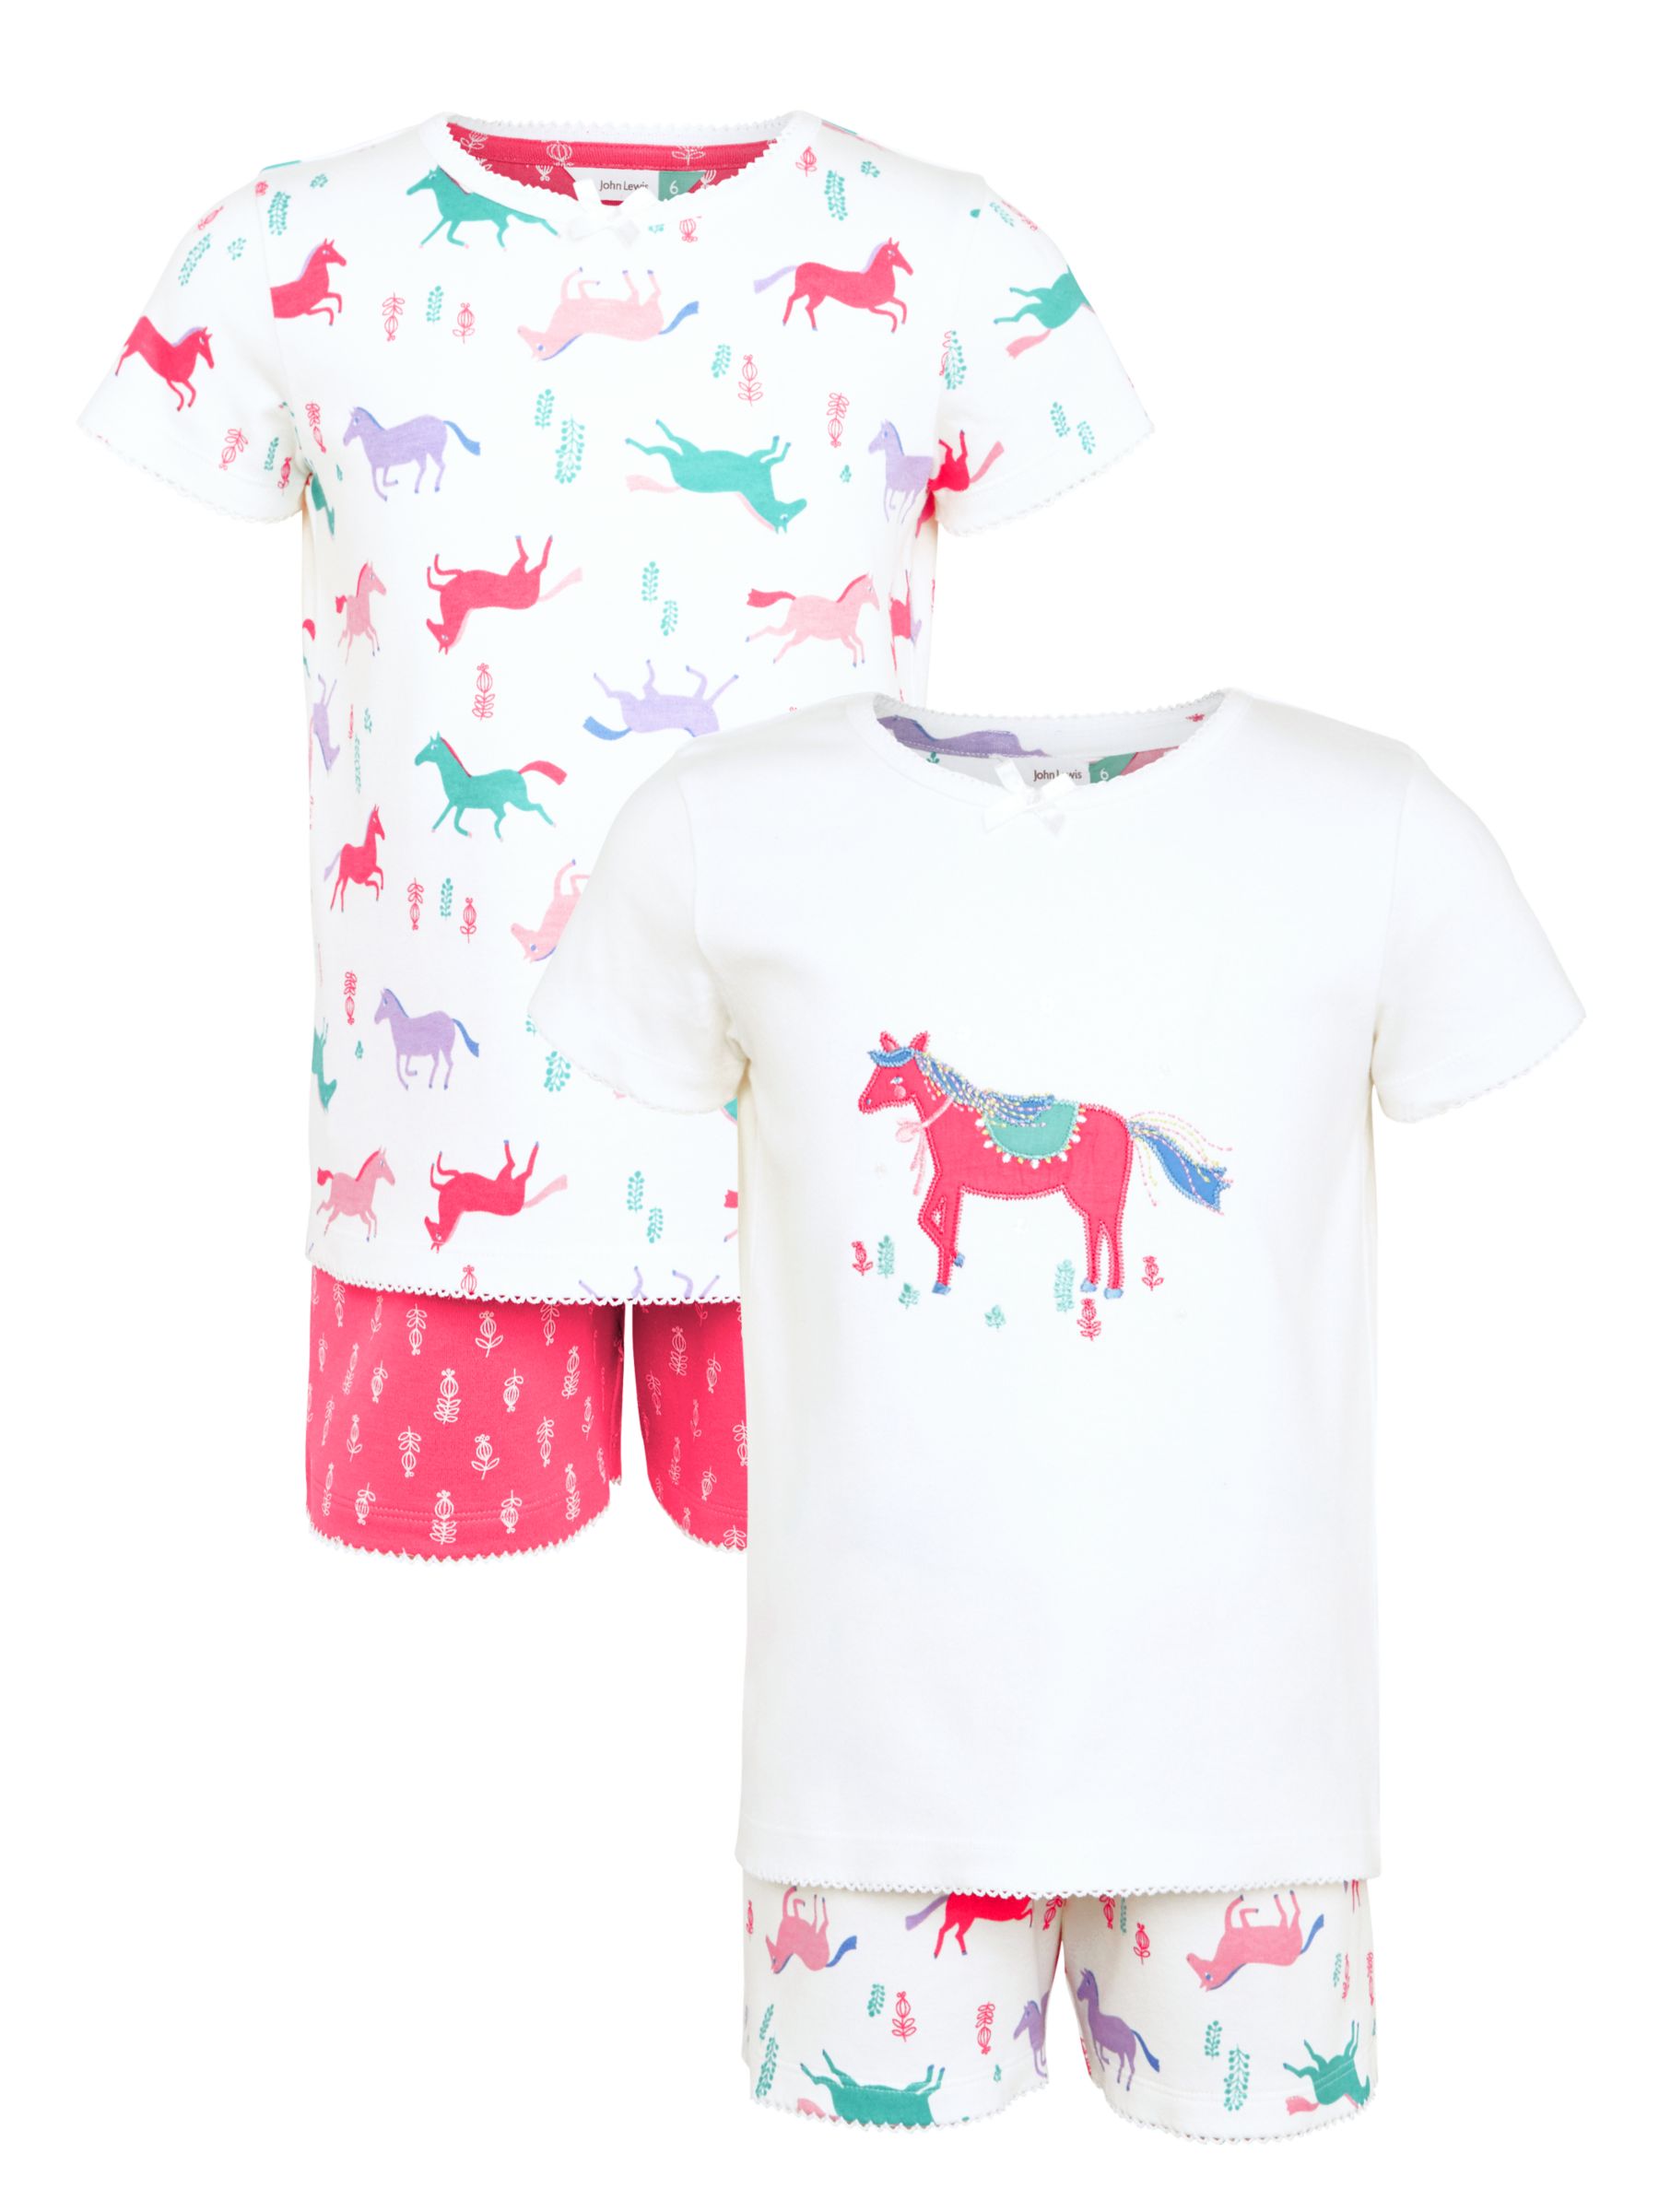 Ages 4-5 5-6 My Little Pony Pyjamas 7-8 and 9-10 Years 